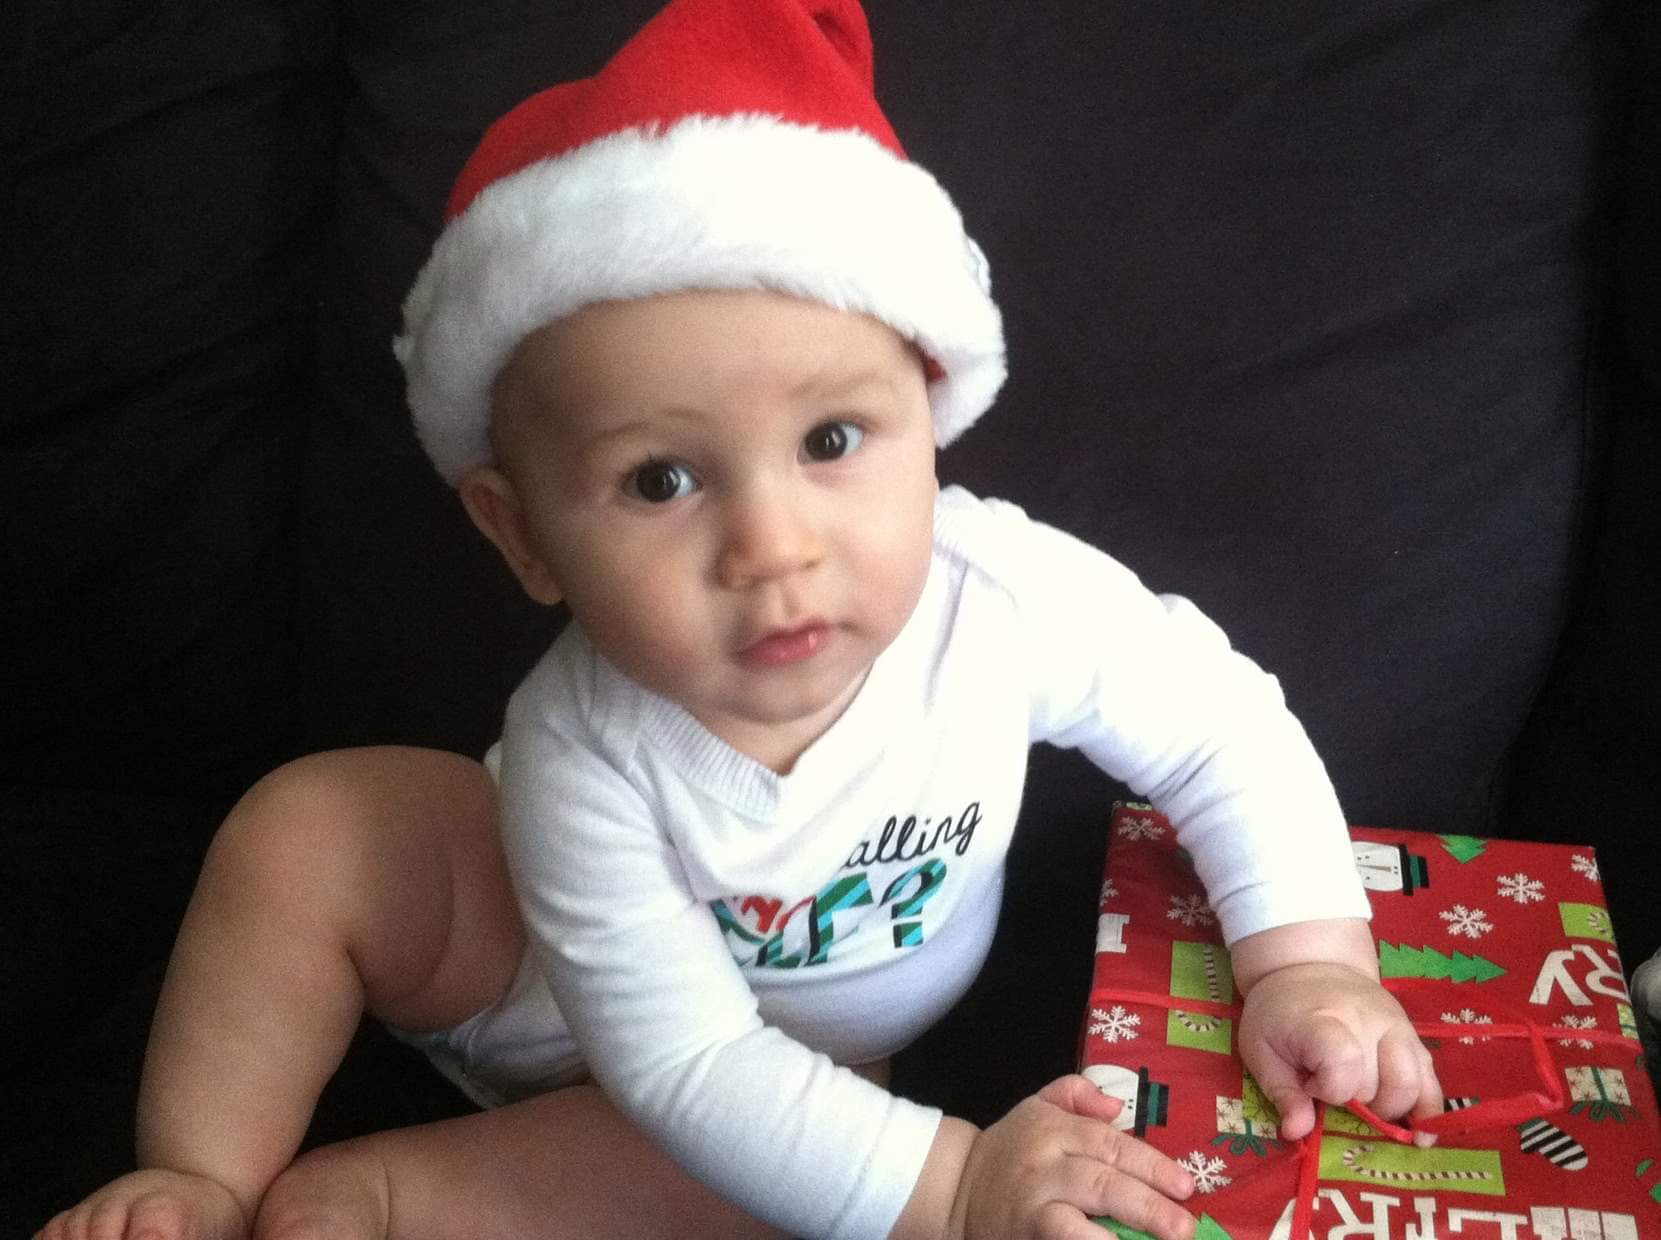 A baby opening a Christmas gift